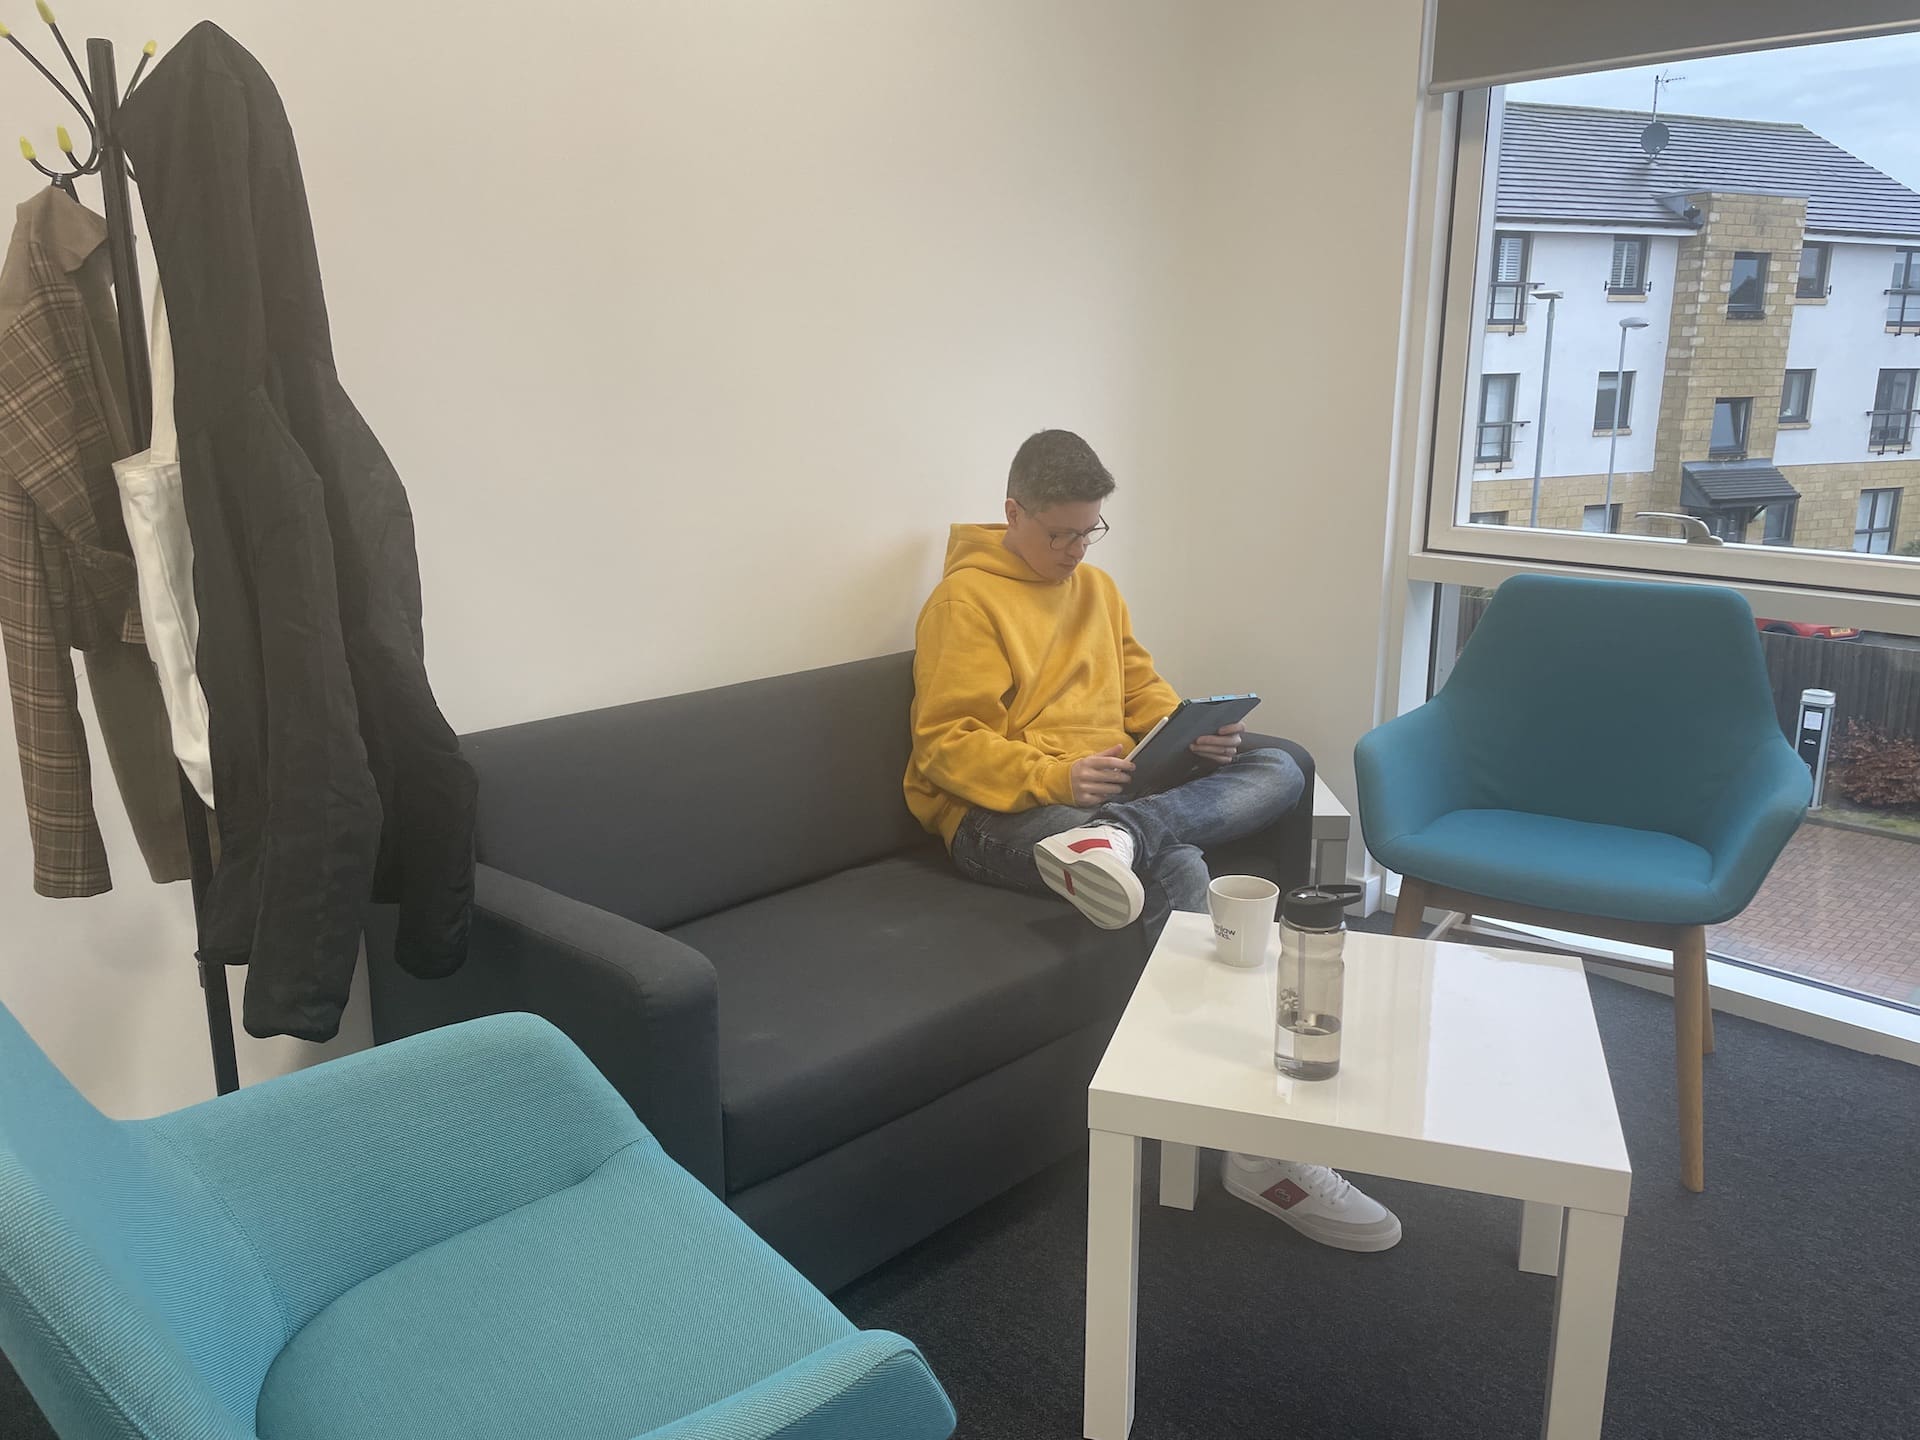 Scoot Managing Director Scott Sutherland sitting on a grey couch in a new office space.